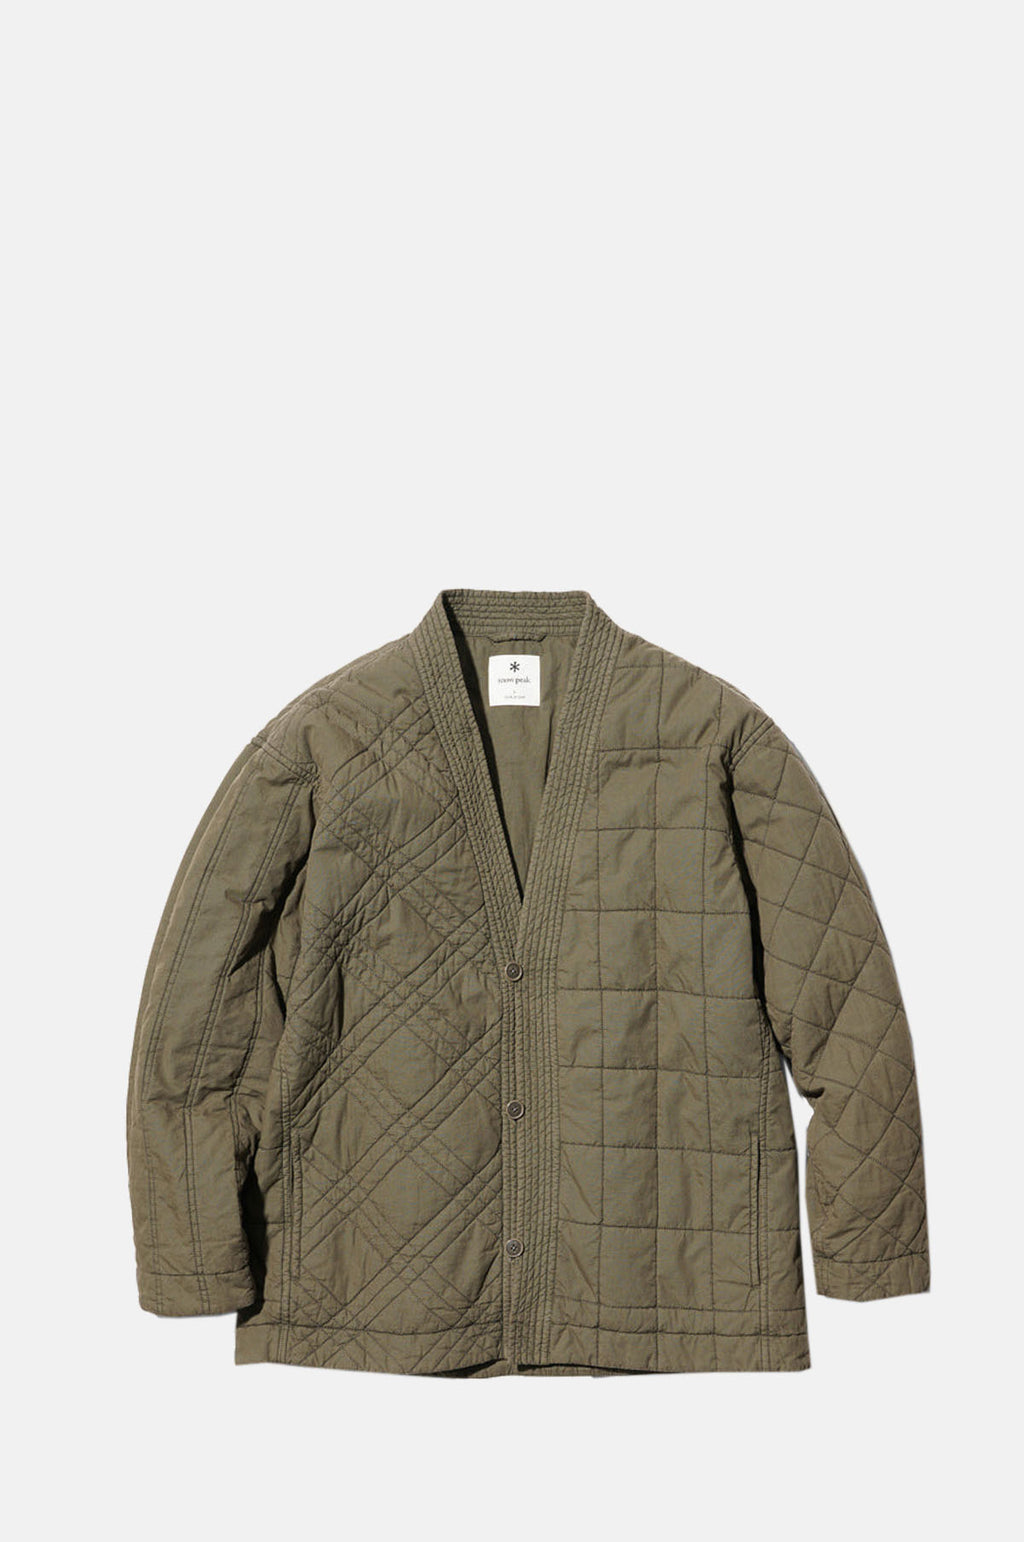 Snow Peak UCCP Quilting Jacket in Olive – The Hambledon